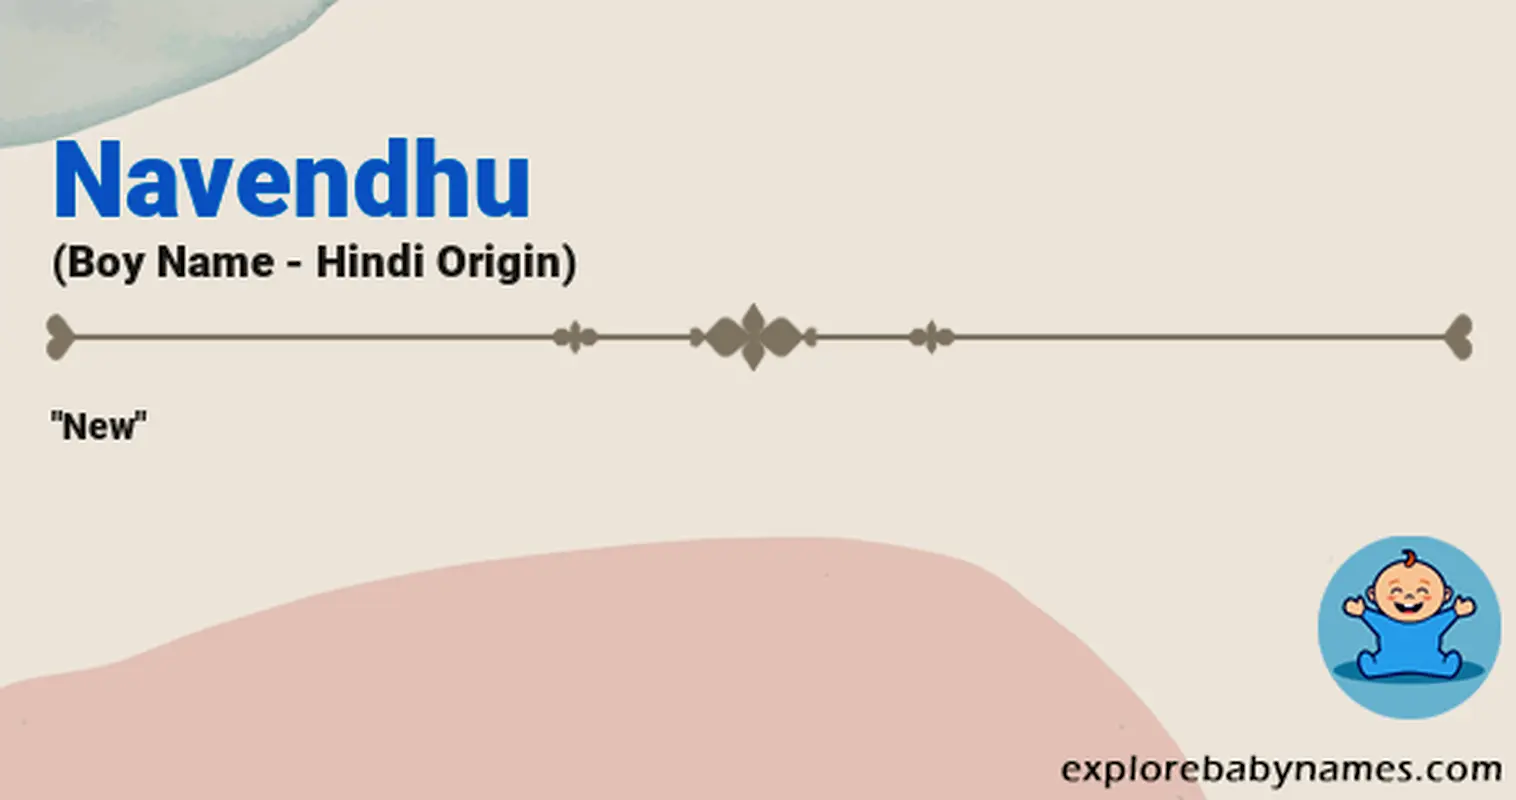 Meaning of Navendhu